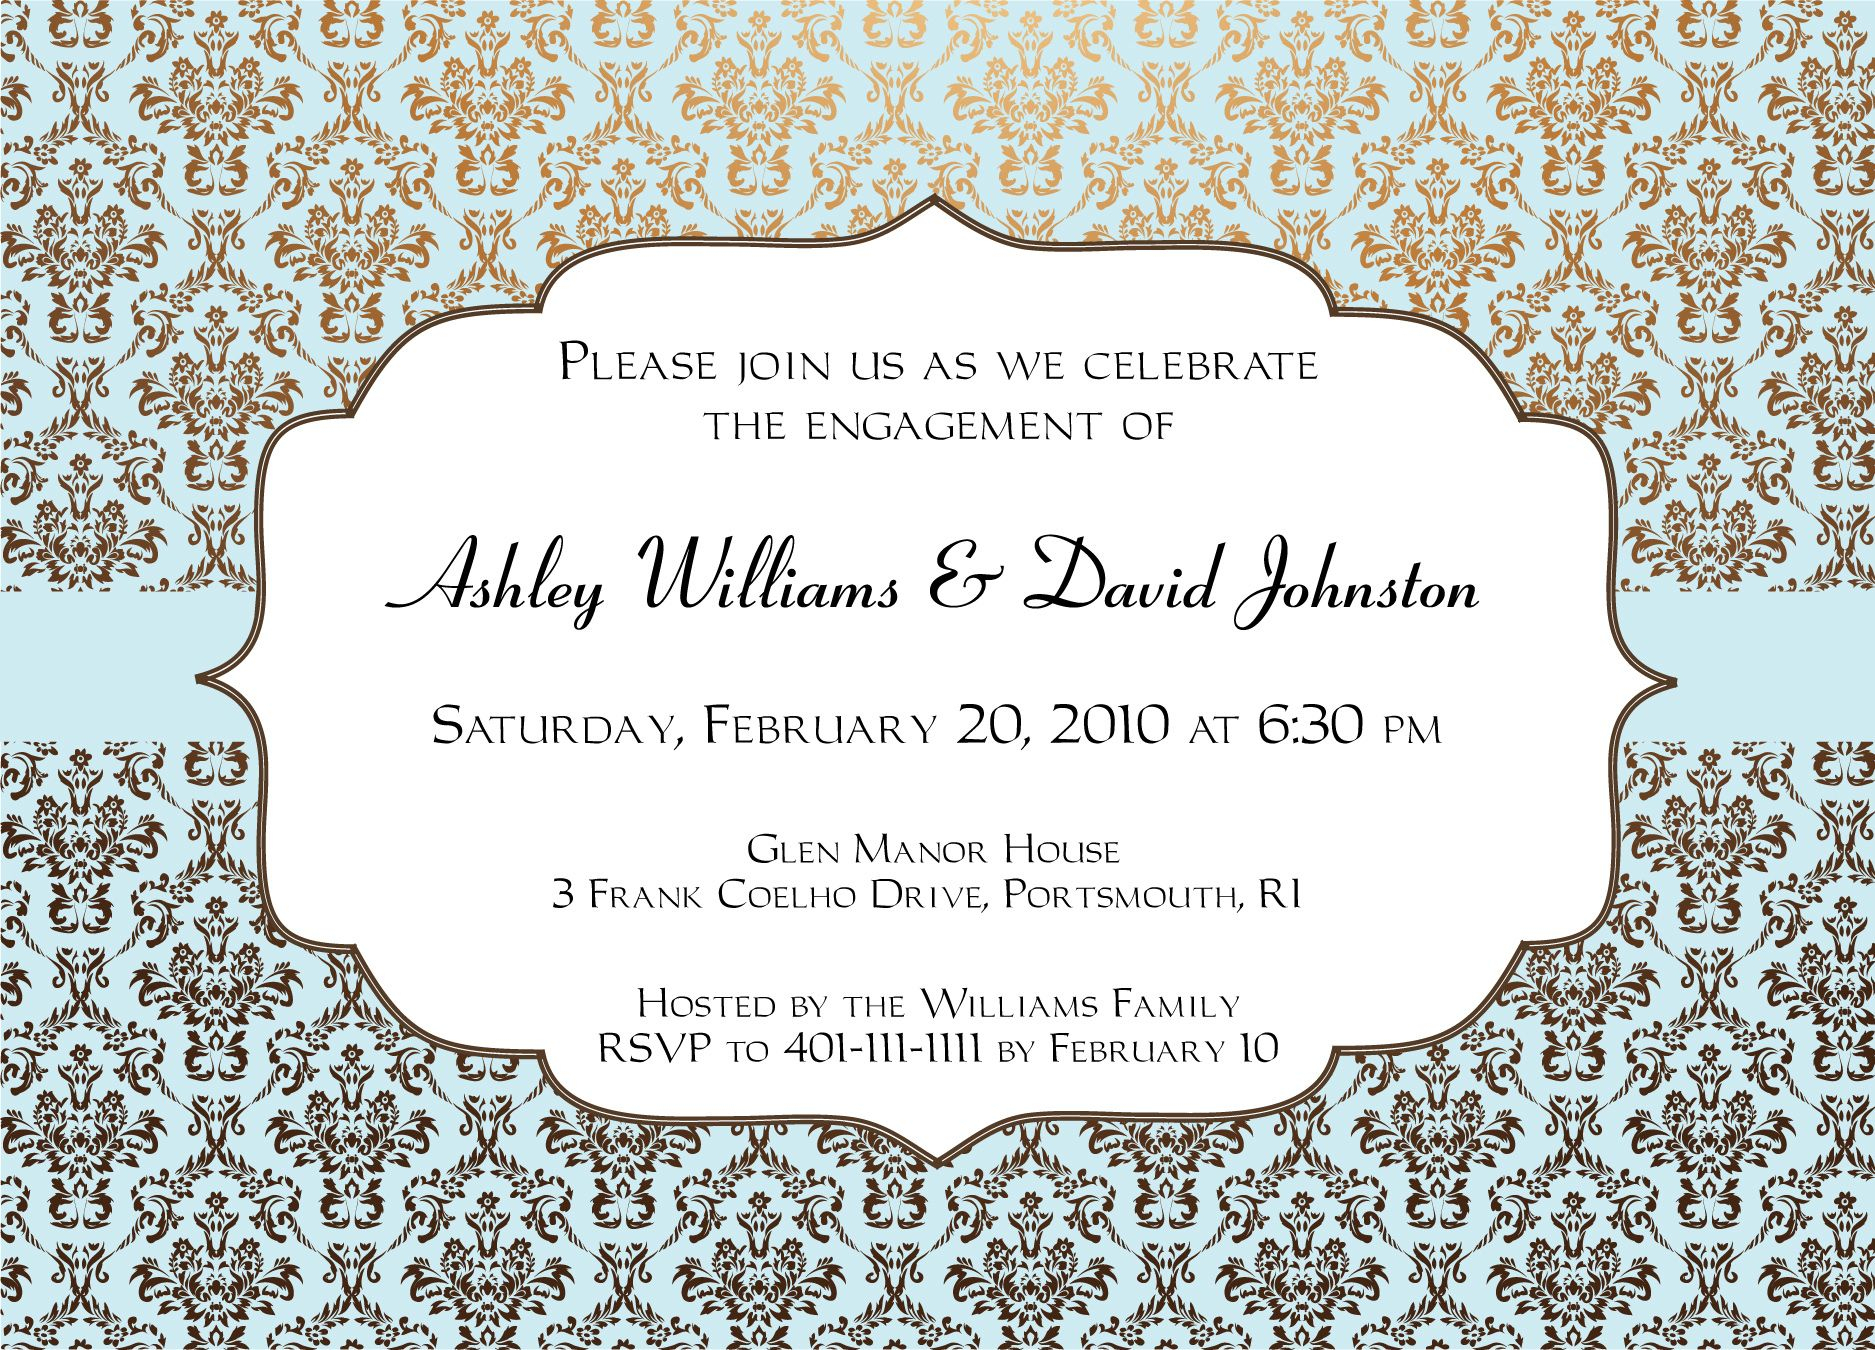 Engagement Party Invitations Templates |  Invitation Templates - Free Printable Engagement Party Invitations